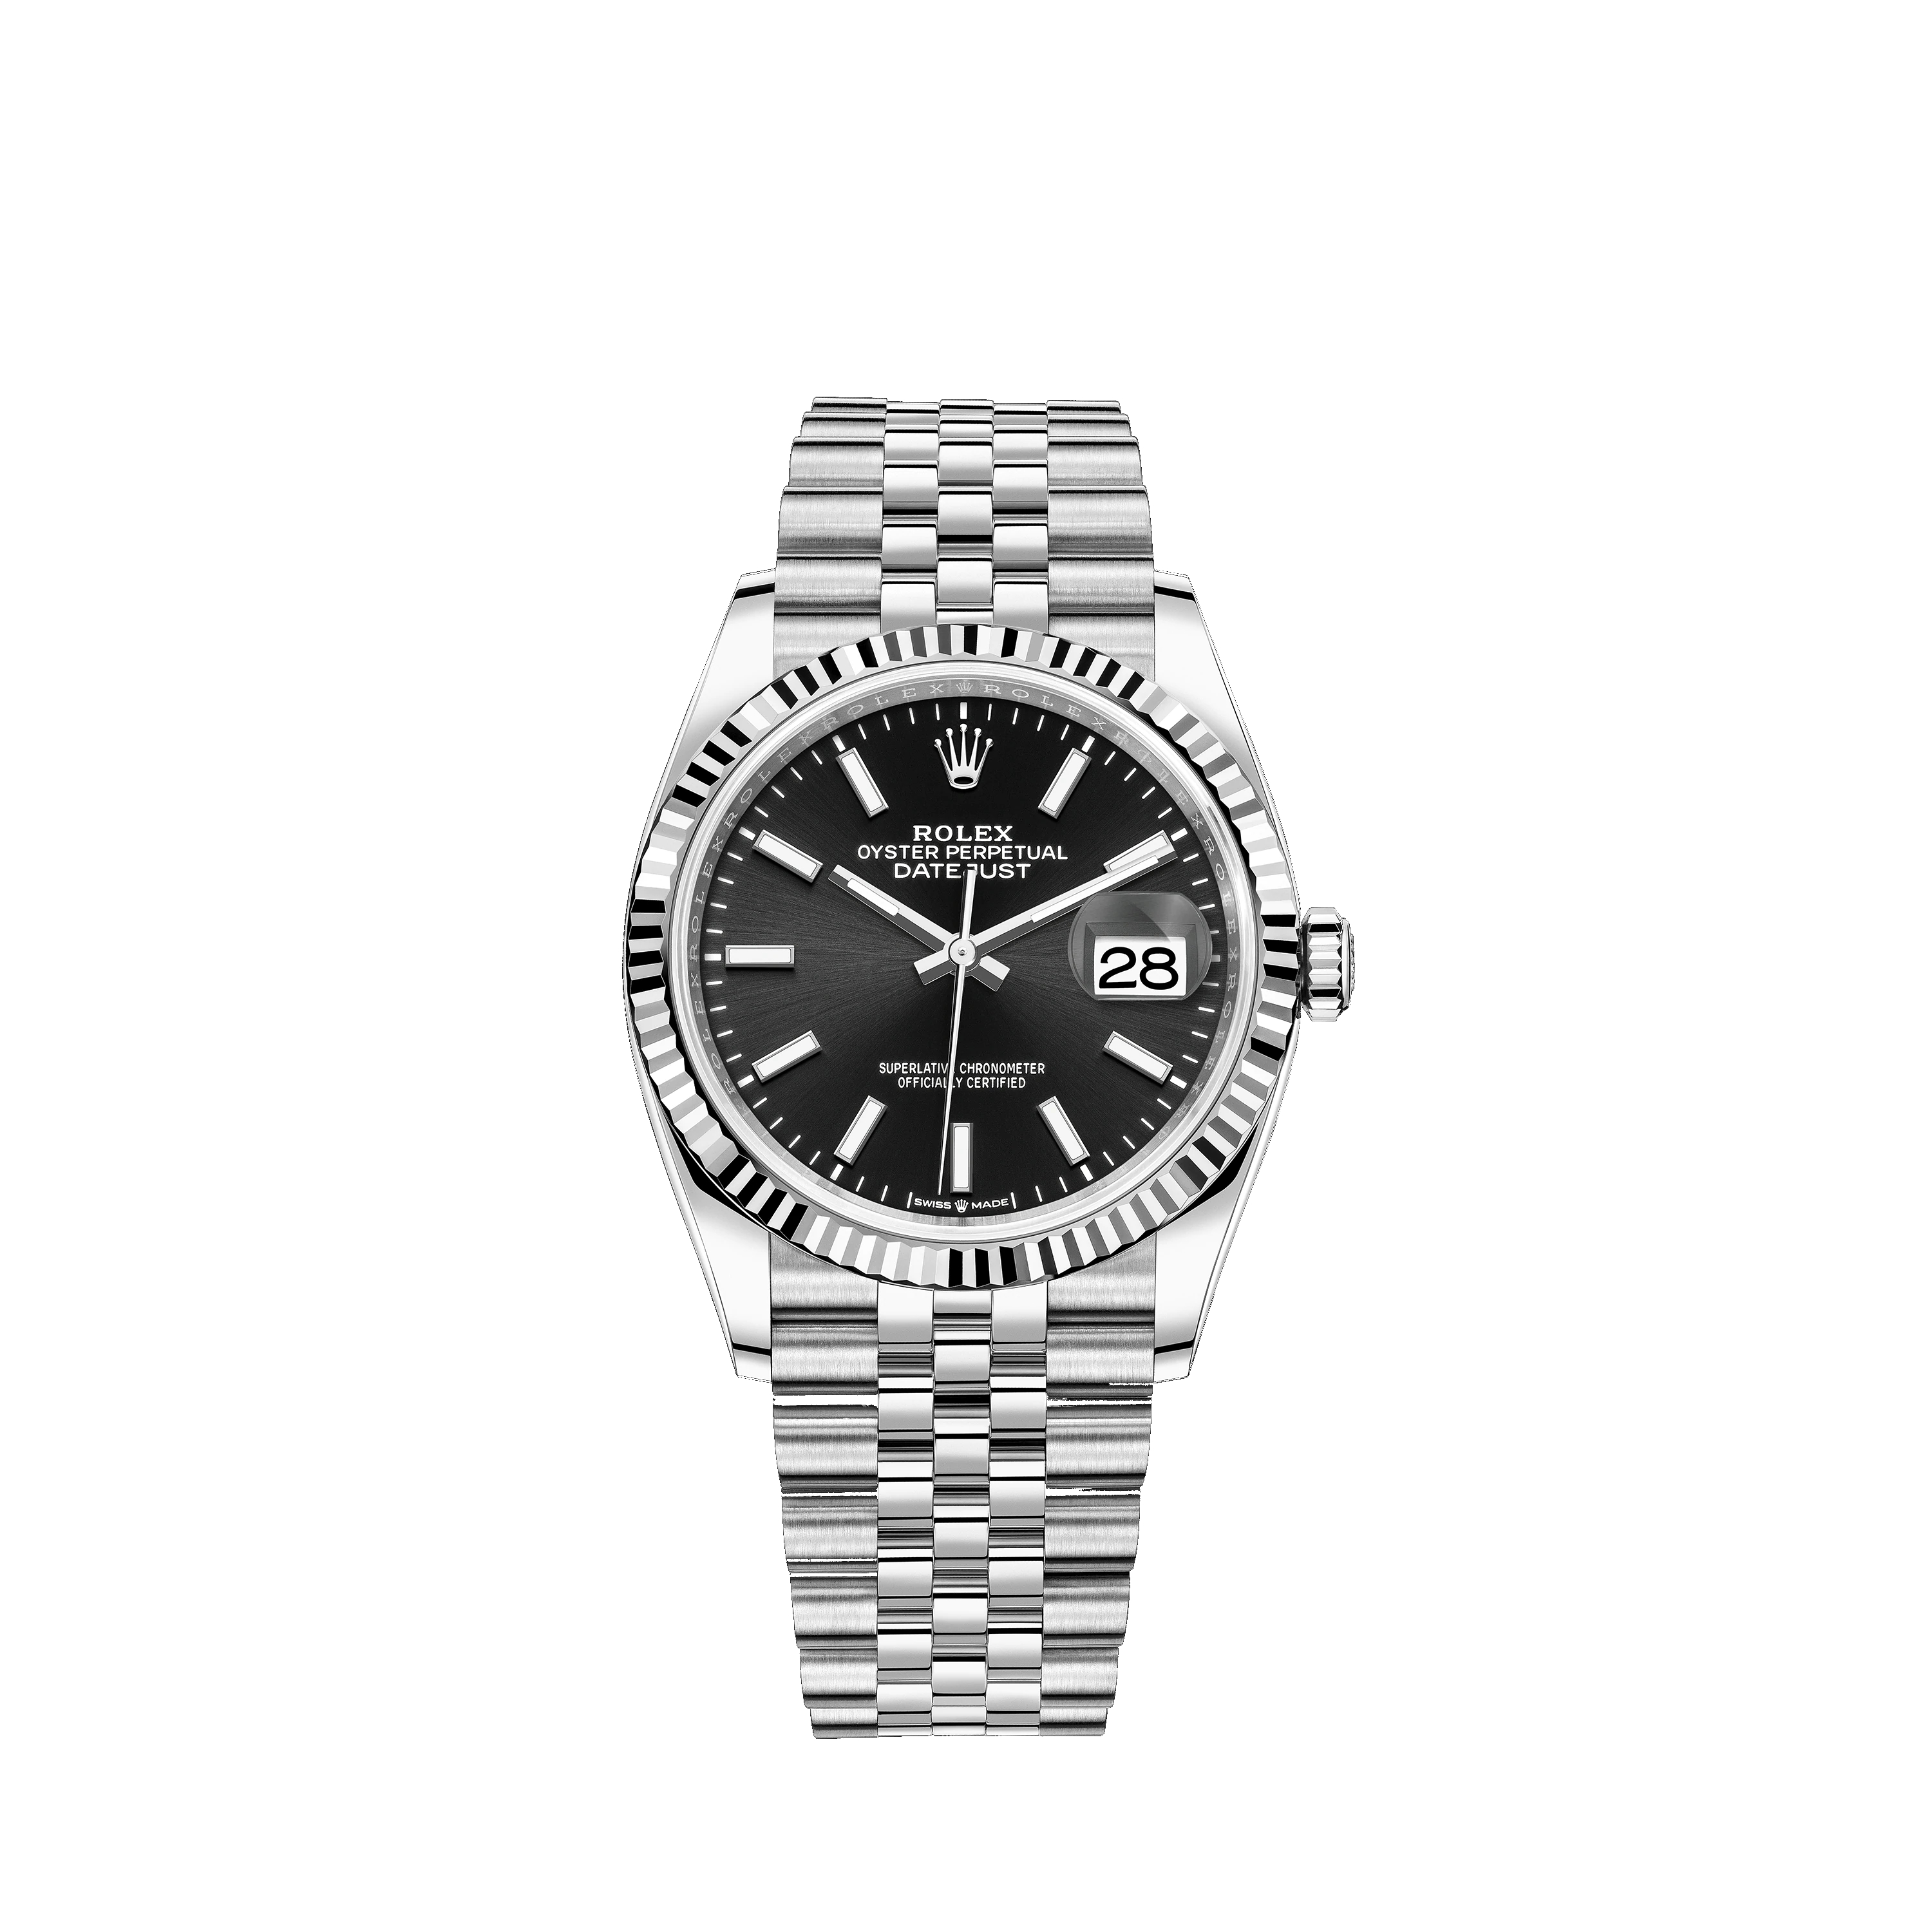 Datejust 36 126234 White Gold & Stainless Steel Watch (Black)